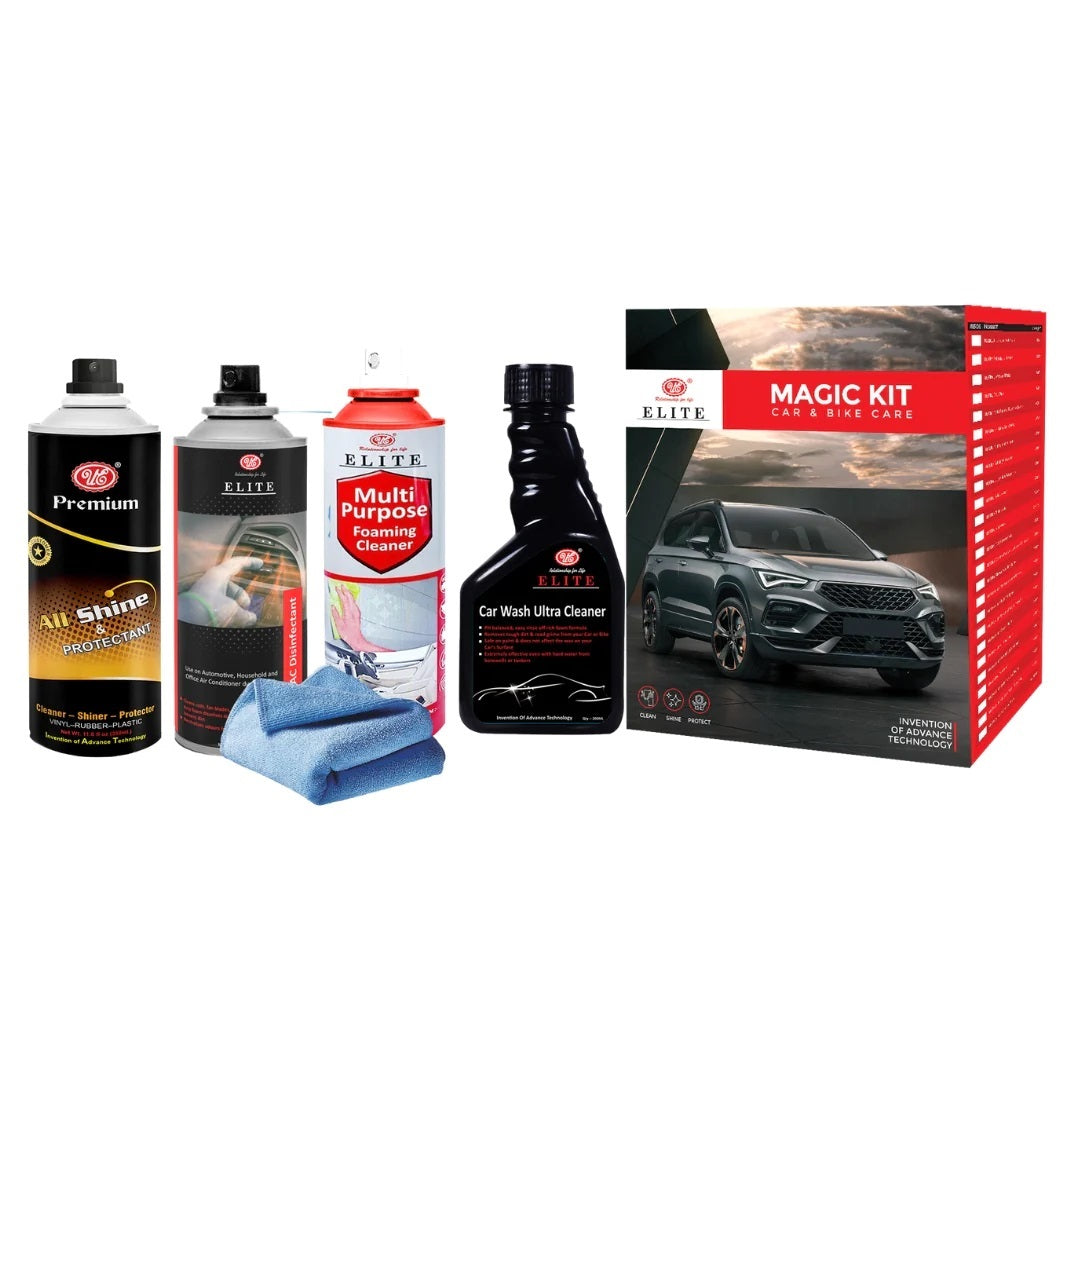 Free vehicle care products